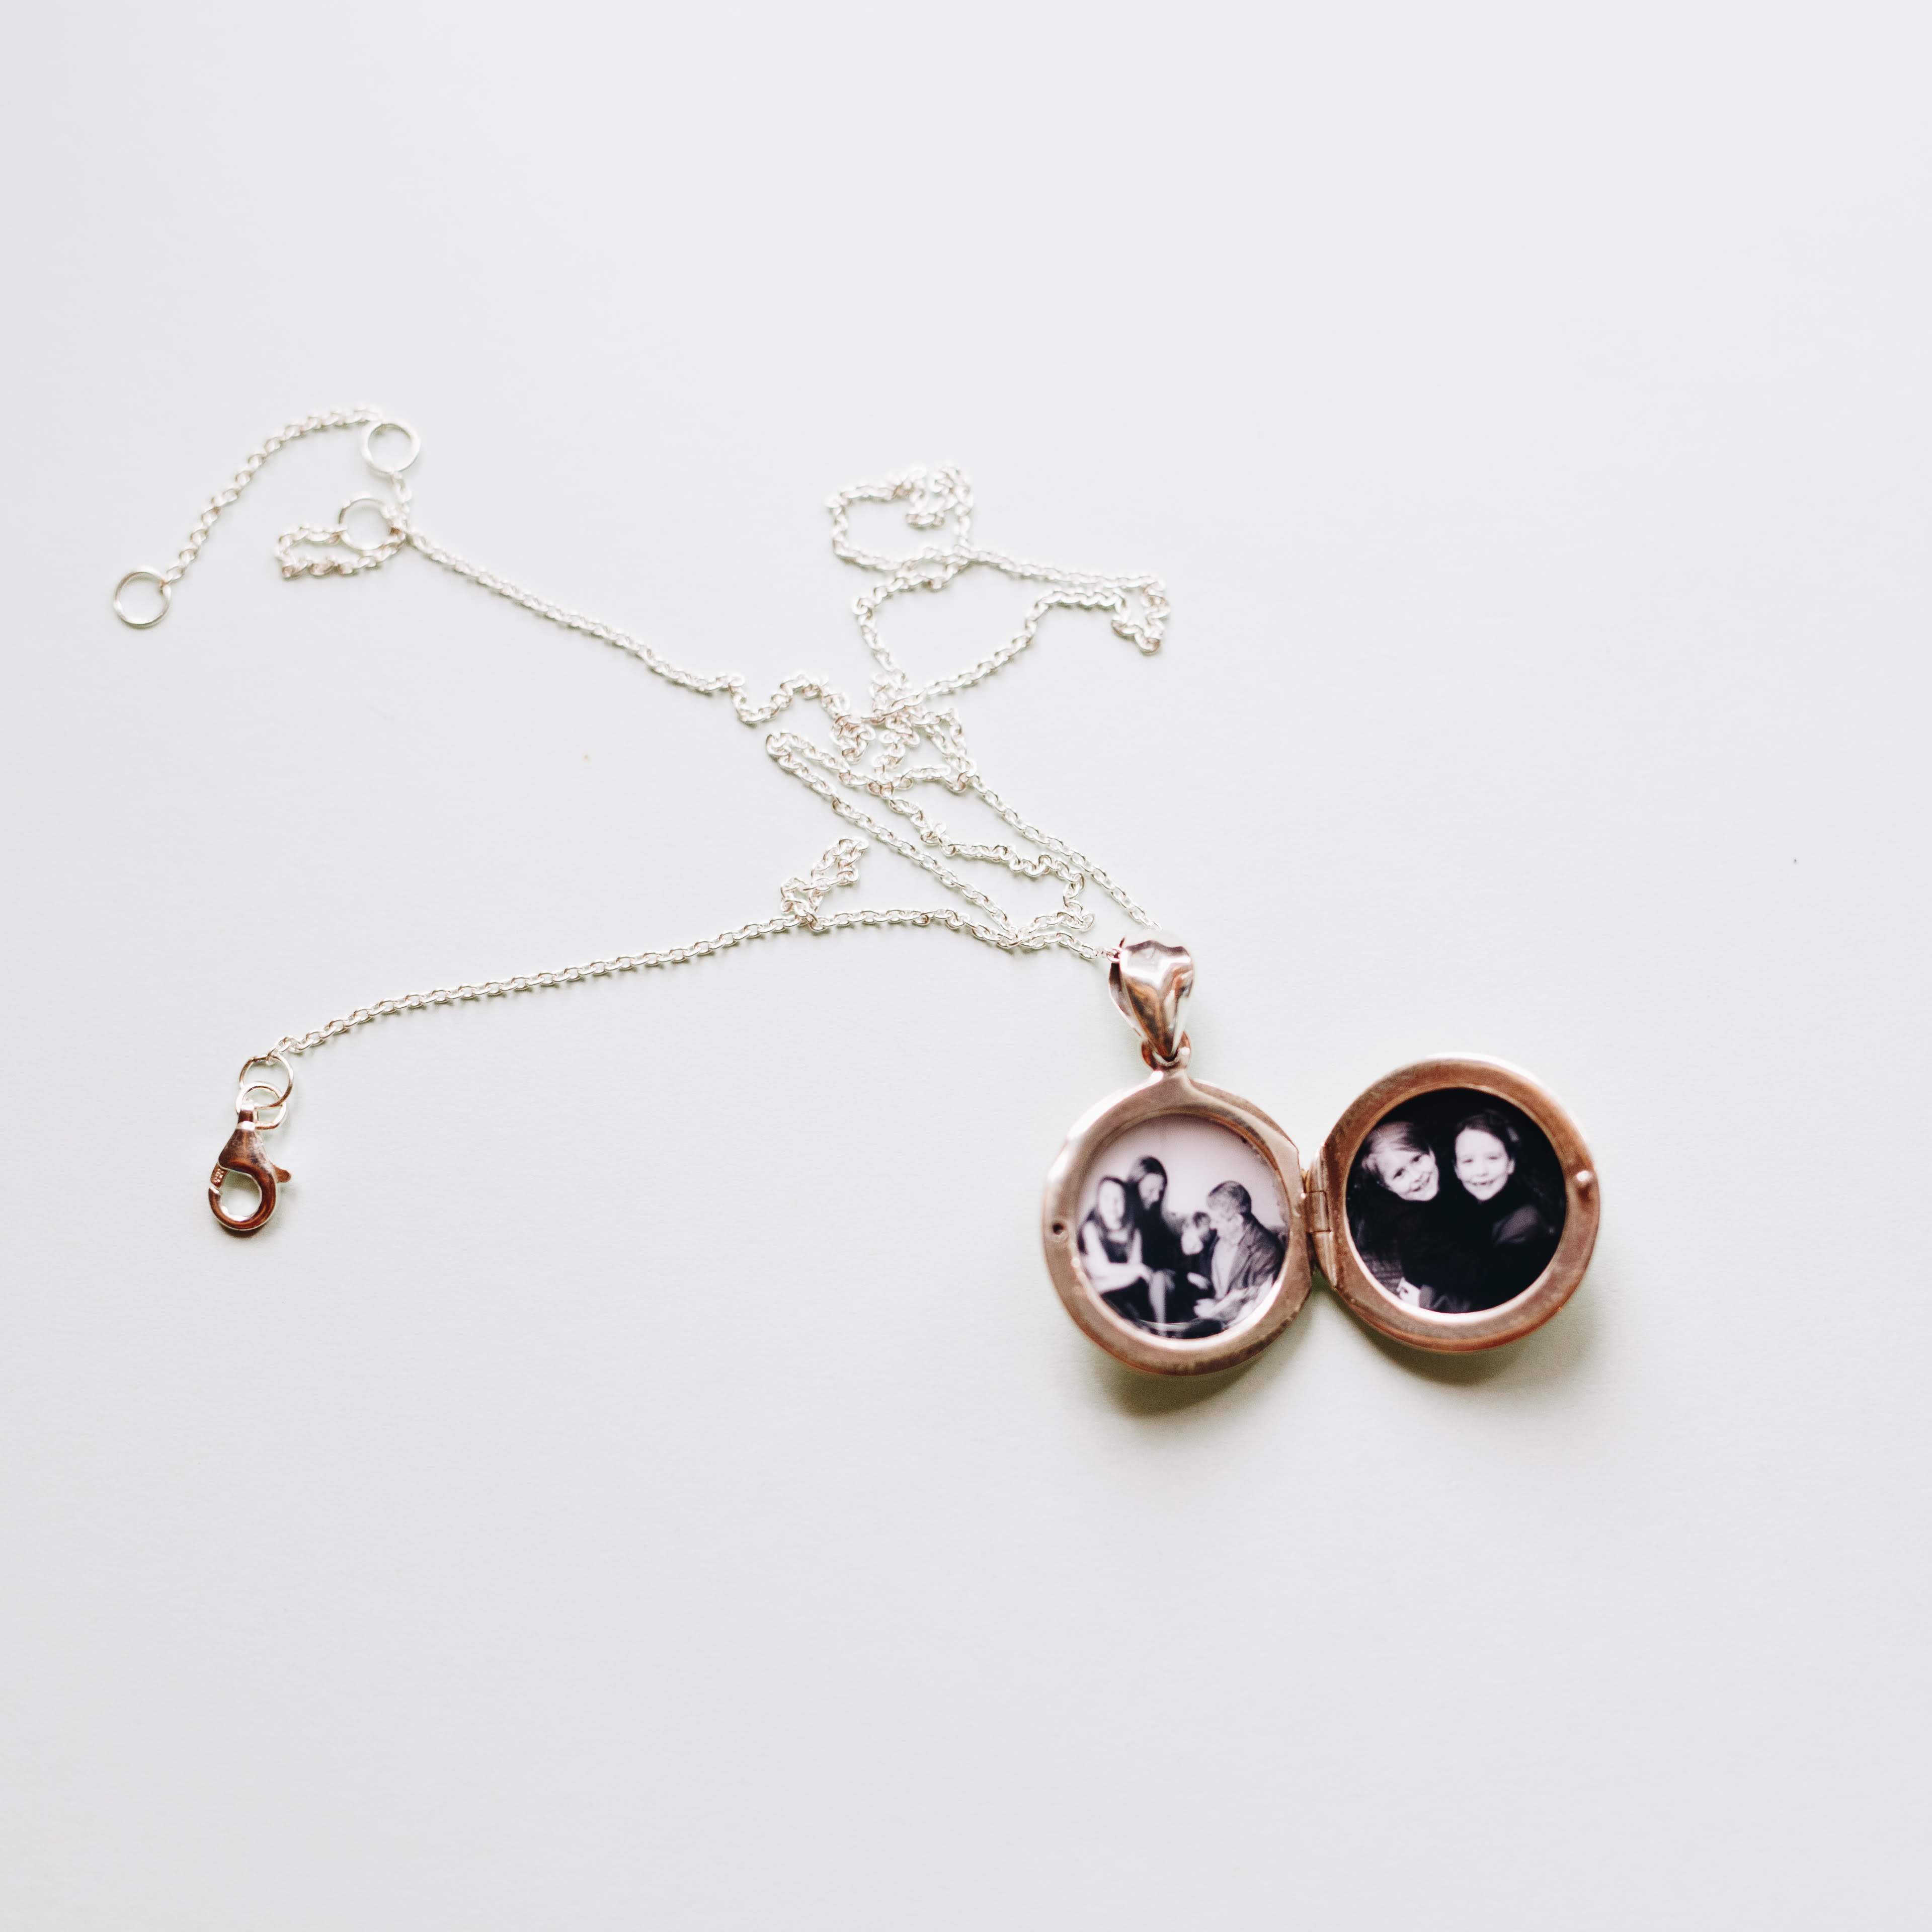 The Silver Lillian Locket with Two Photos Placed Inside